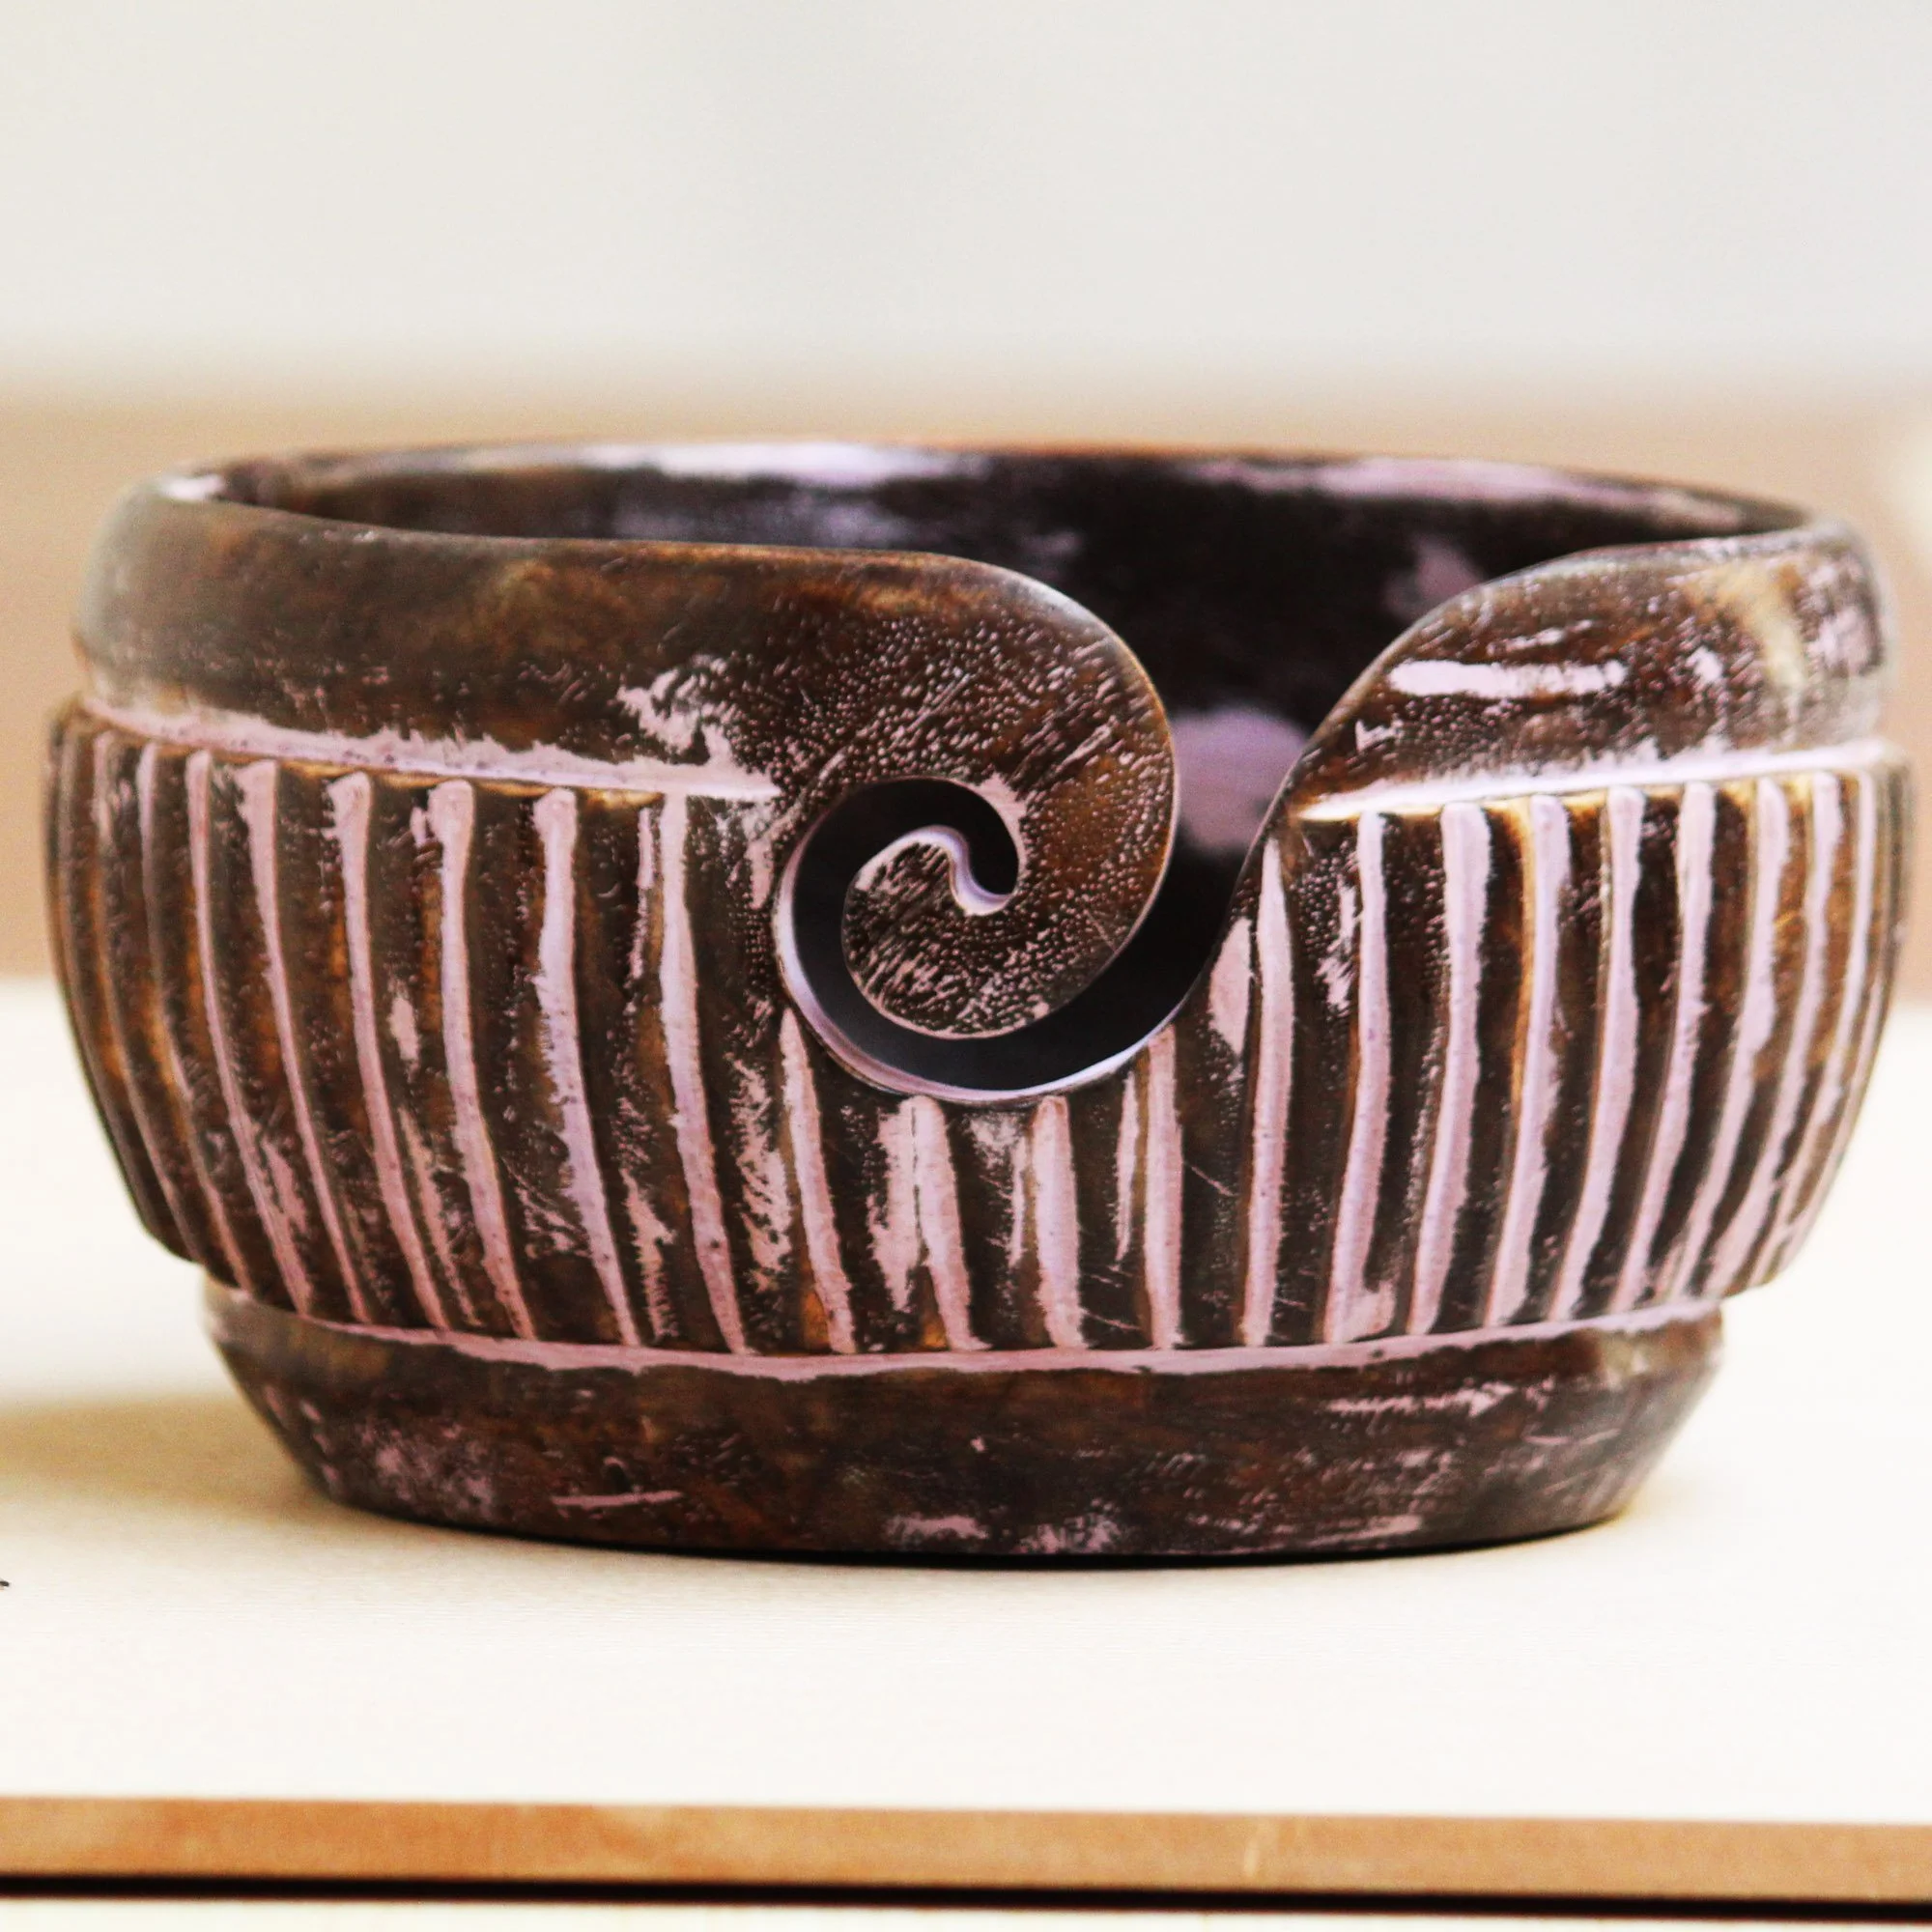 How to Make an Upcycled Yarn Bowl - Dukes and Duchesses